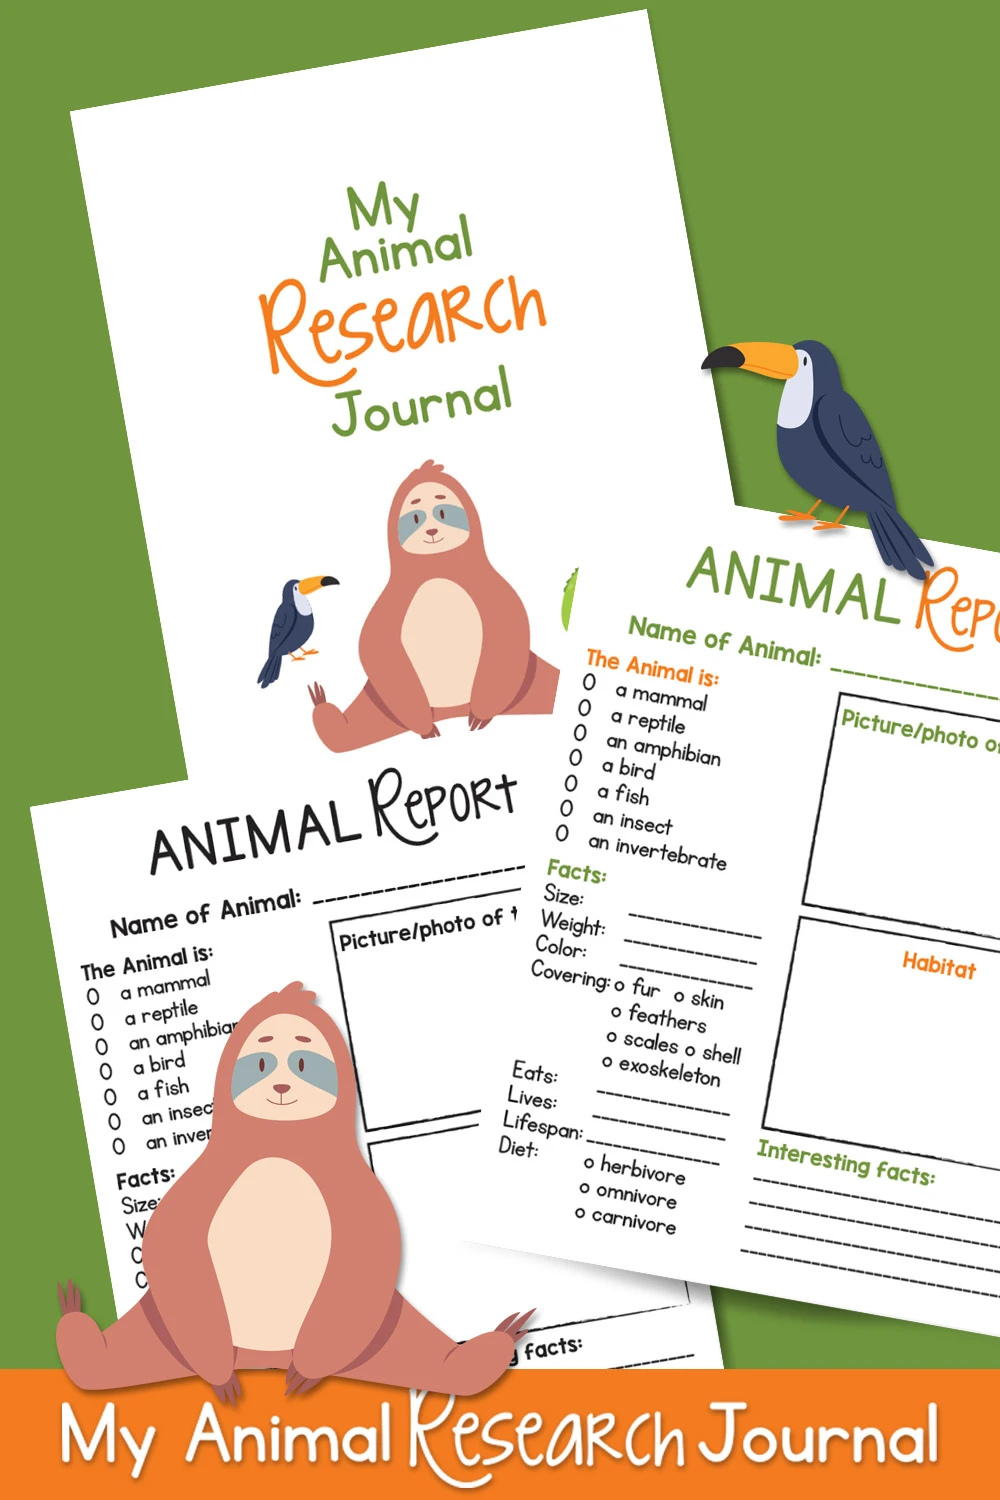 Writing a report on animals can be fun and educational with this free printable animal report template! Perfect for grade school students!